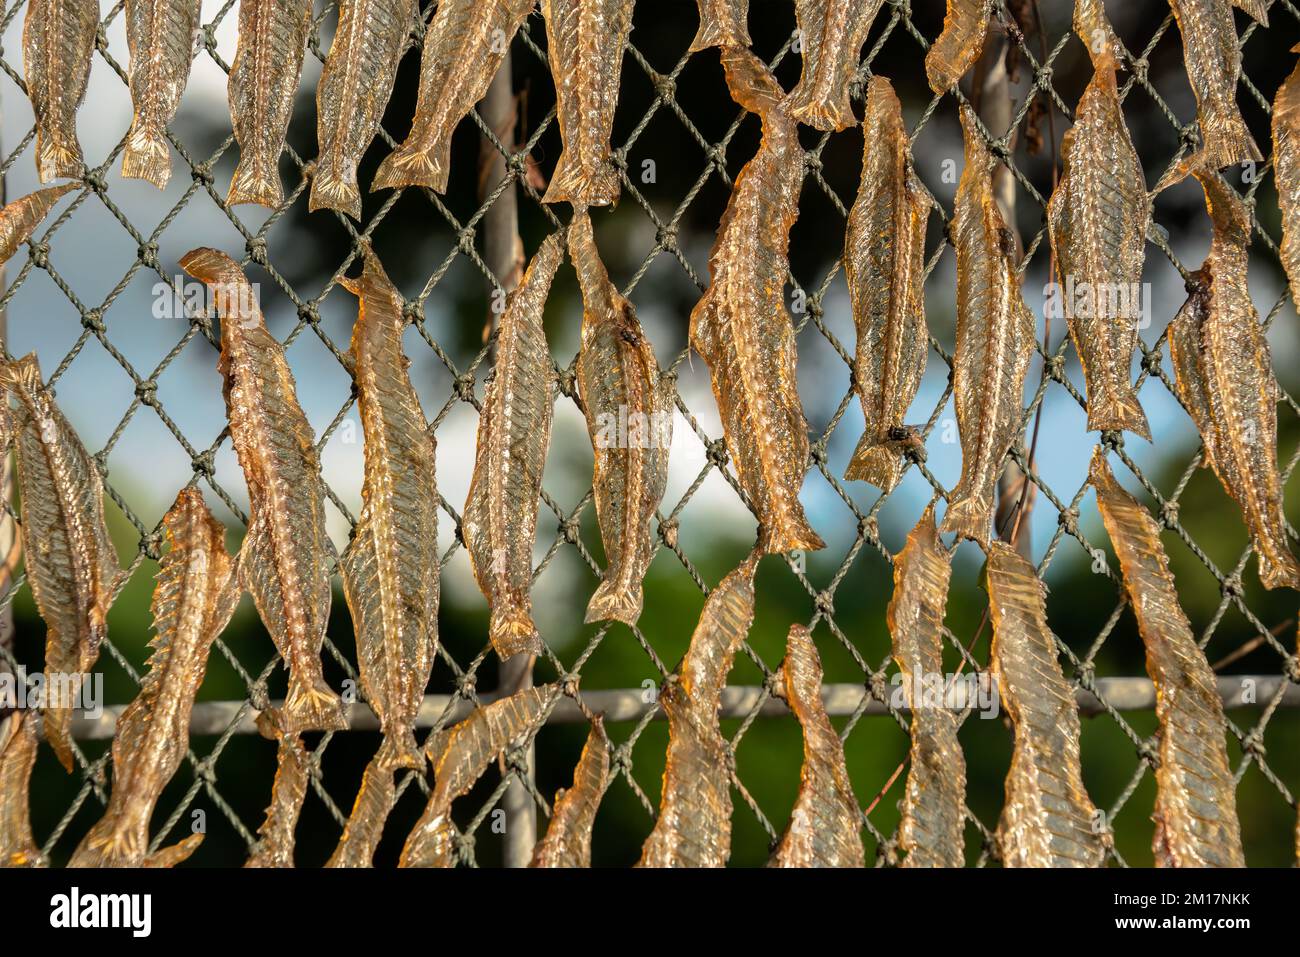 Close-up of sun-dried fish. Small dried fishes are prepared by sun drying them for several days. Stock Photo